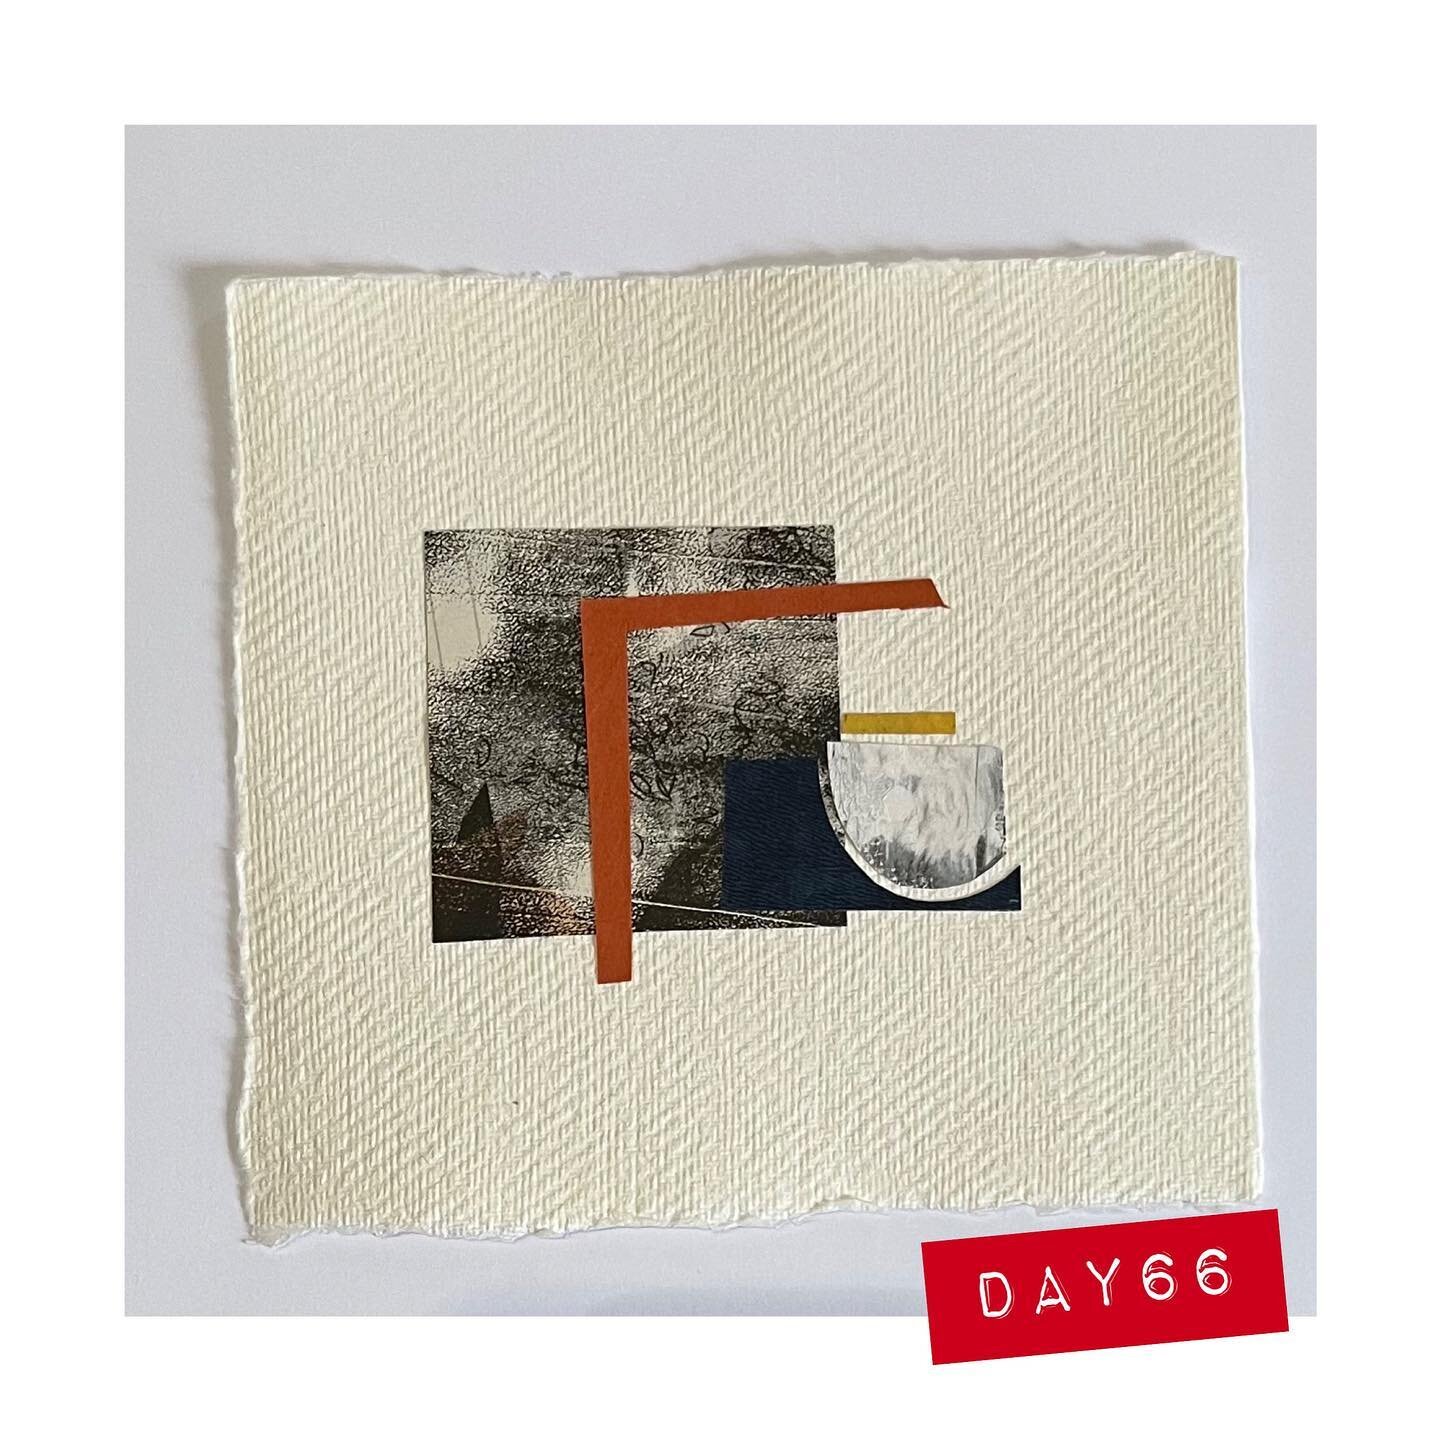 Day 66

Having a Ben Nicholson moment!!!

🤍 #100dayproject2023 #the100dayproject #cqpapercollage #paperplay #gelliplate #gelliplateprinting #collage #collageart #paperart #creativeart #collageonpaper #khadipaper